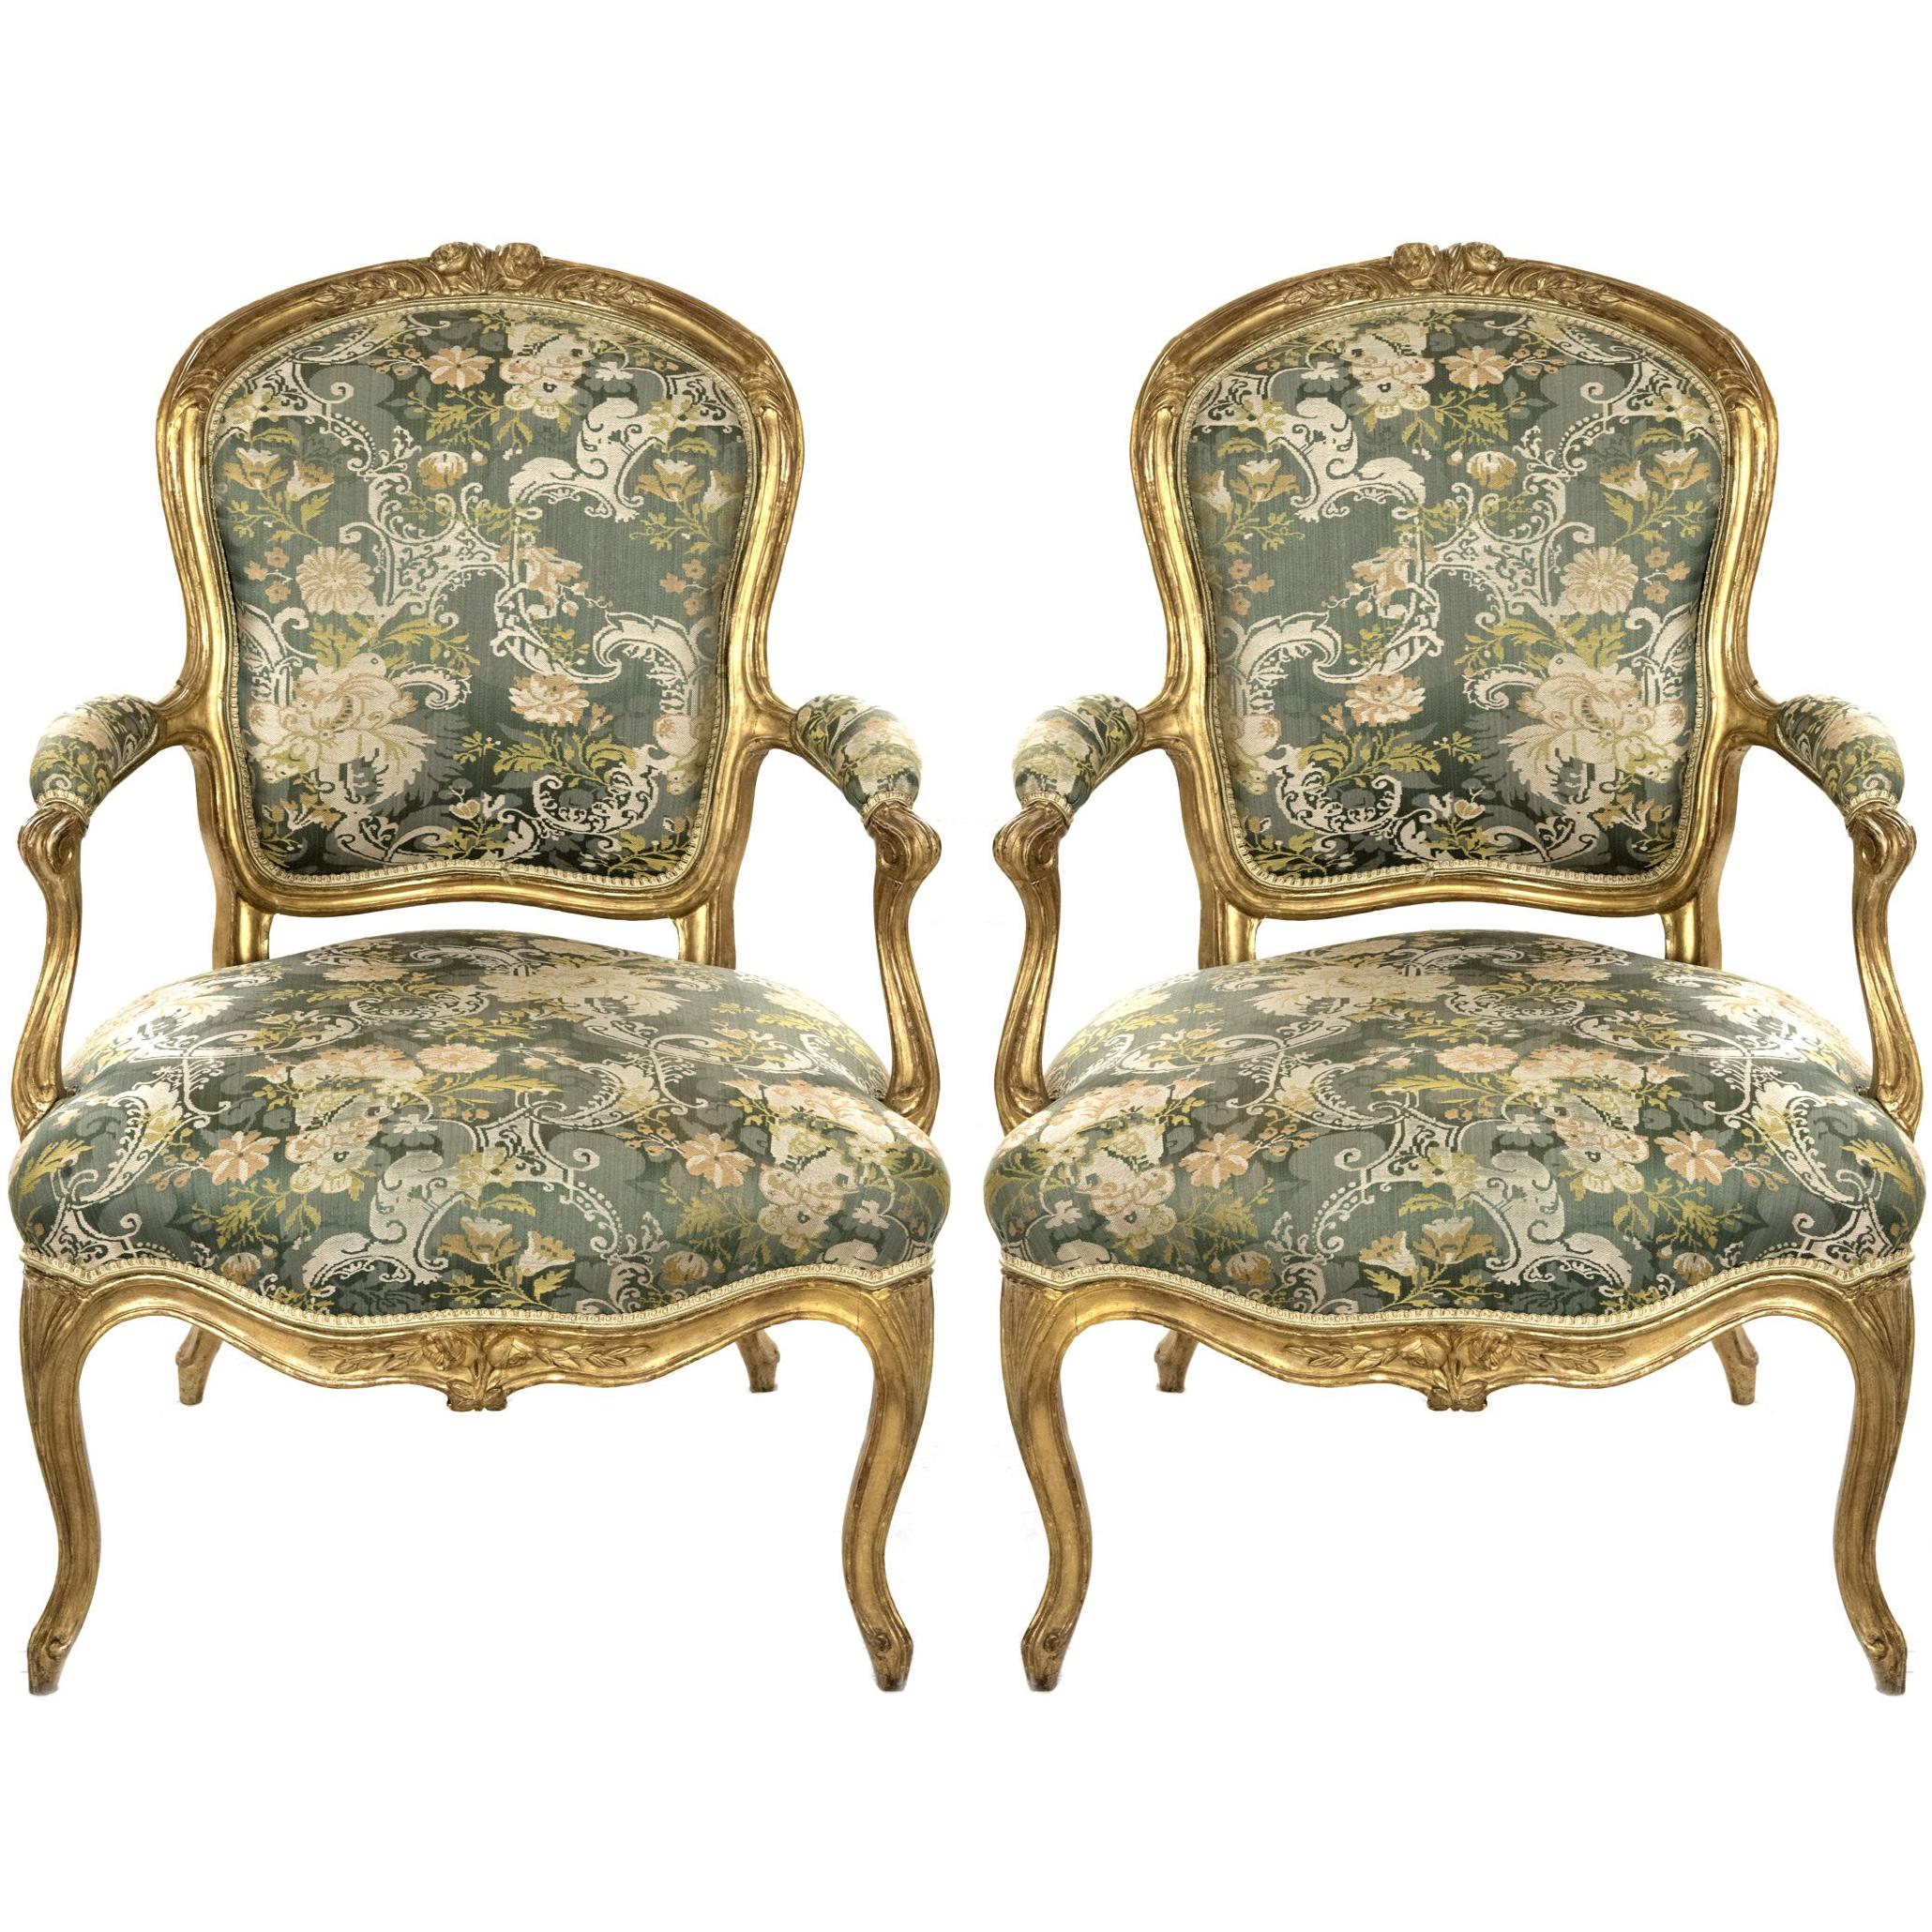 Pair of Louis XV Carved Giltwood Fauteuils